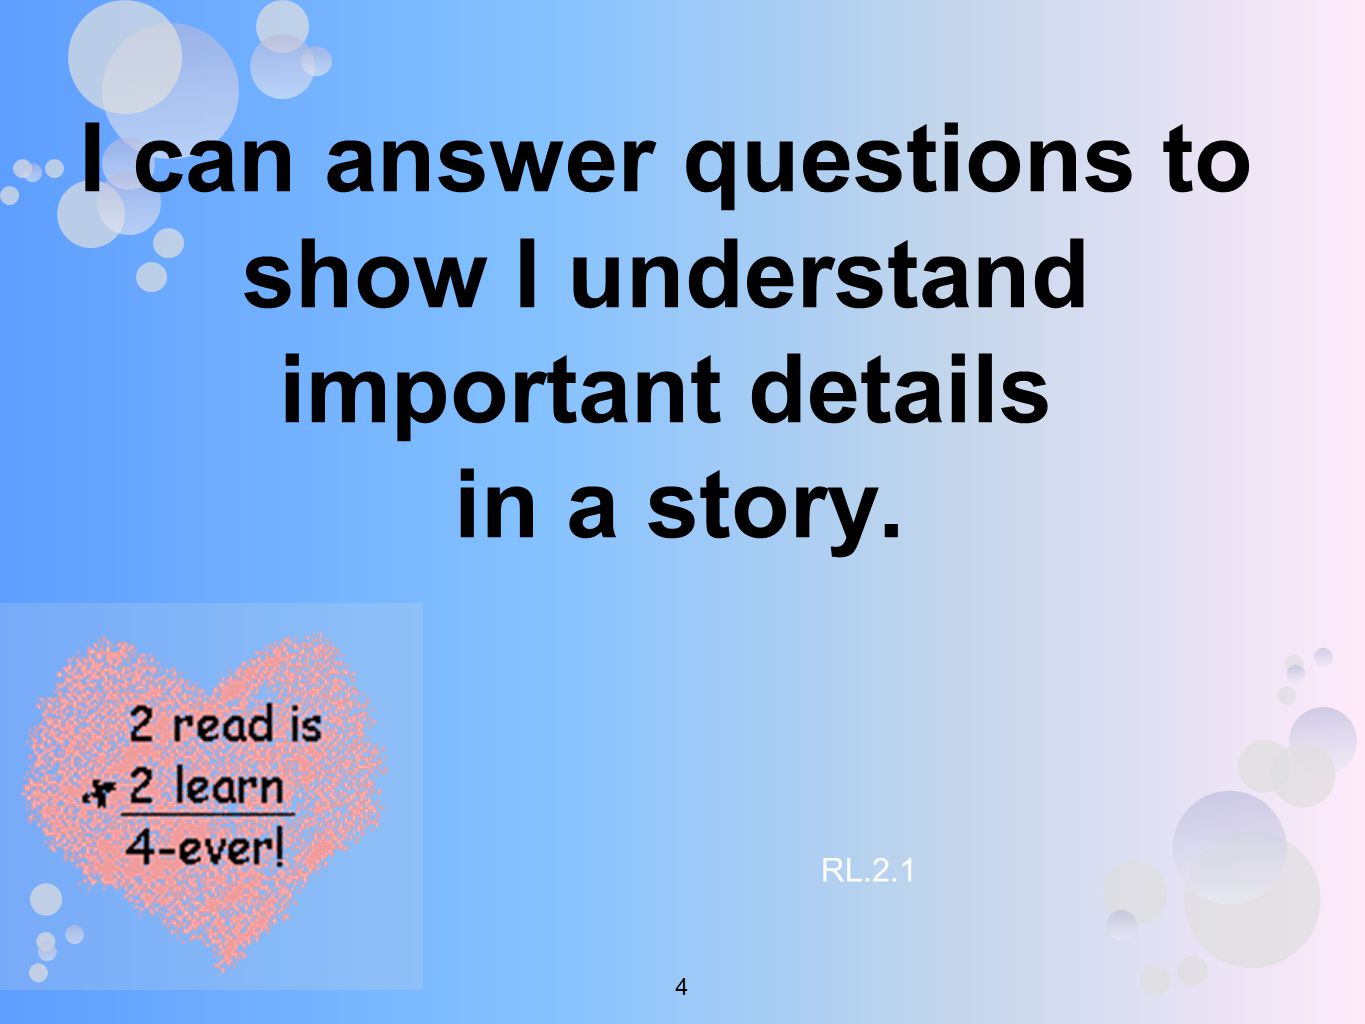 I can answer questions to show I understand important details in a story. RL.2.1 4